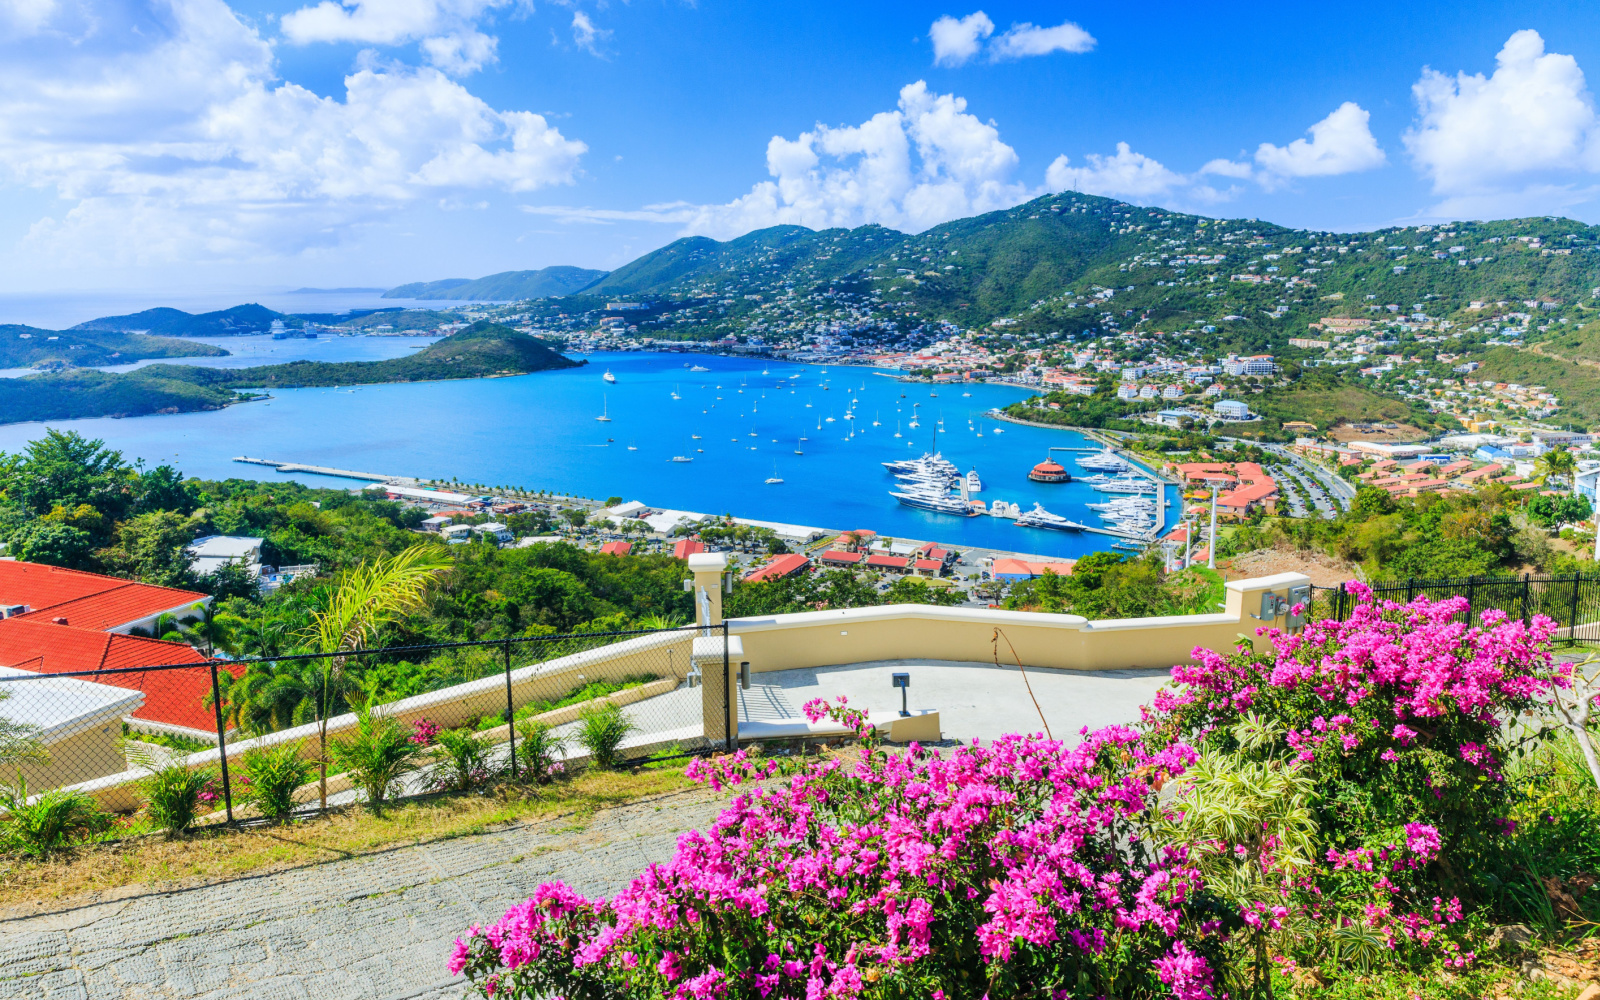 The Best Time to Visit the U.S. Virgin Islands in 2023